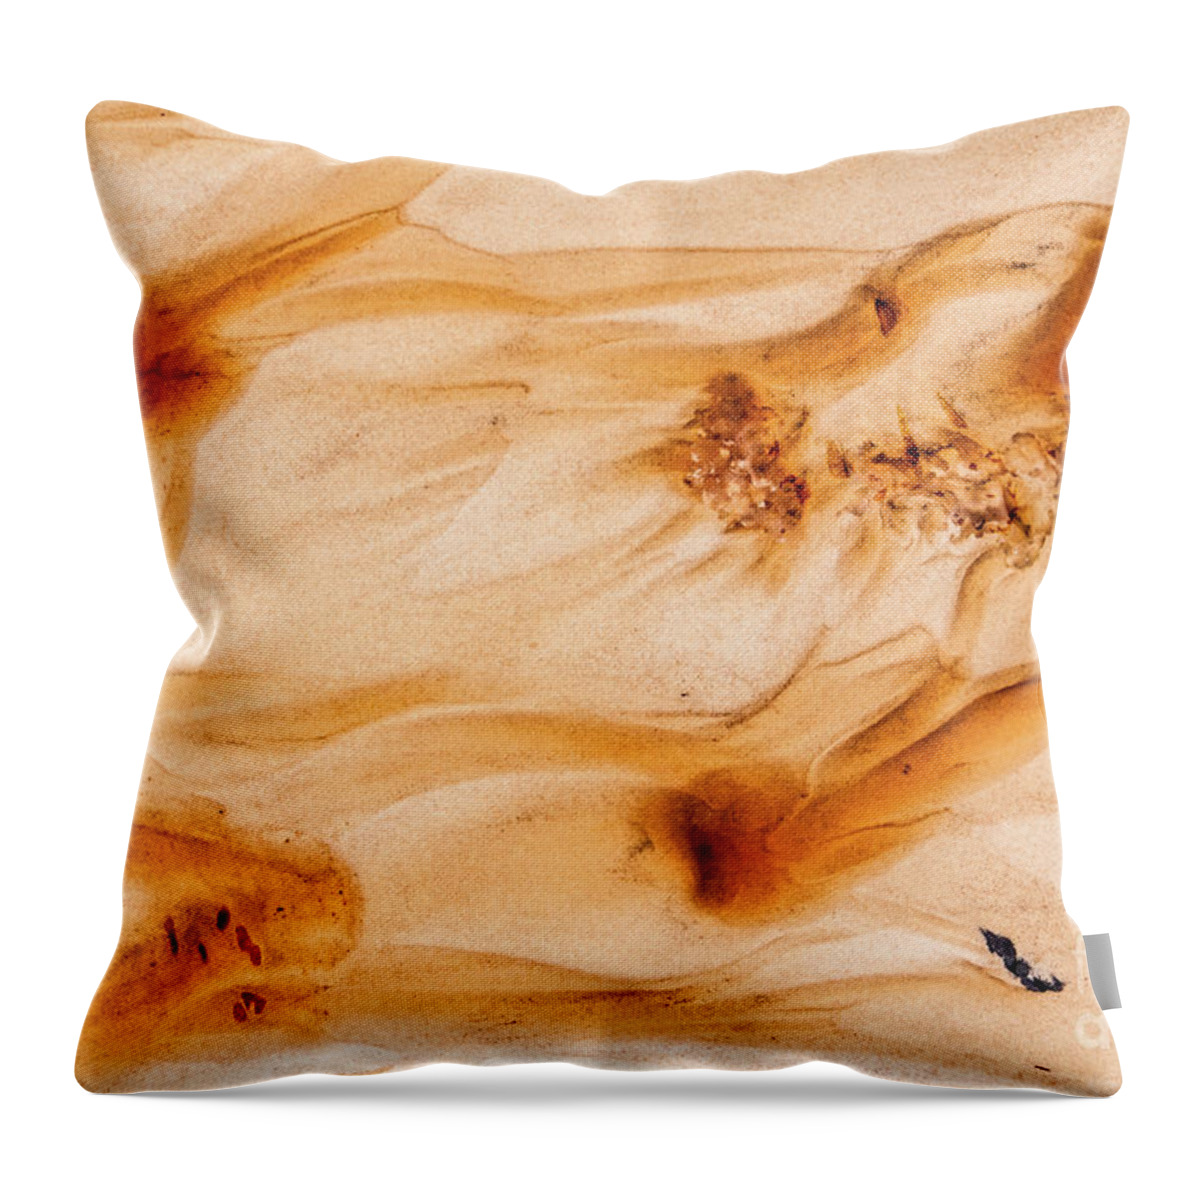 Sand Throw Pillow featuring the photograph Nature's Art 2 by Werner Padarin